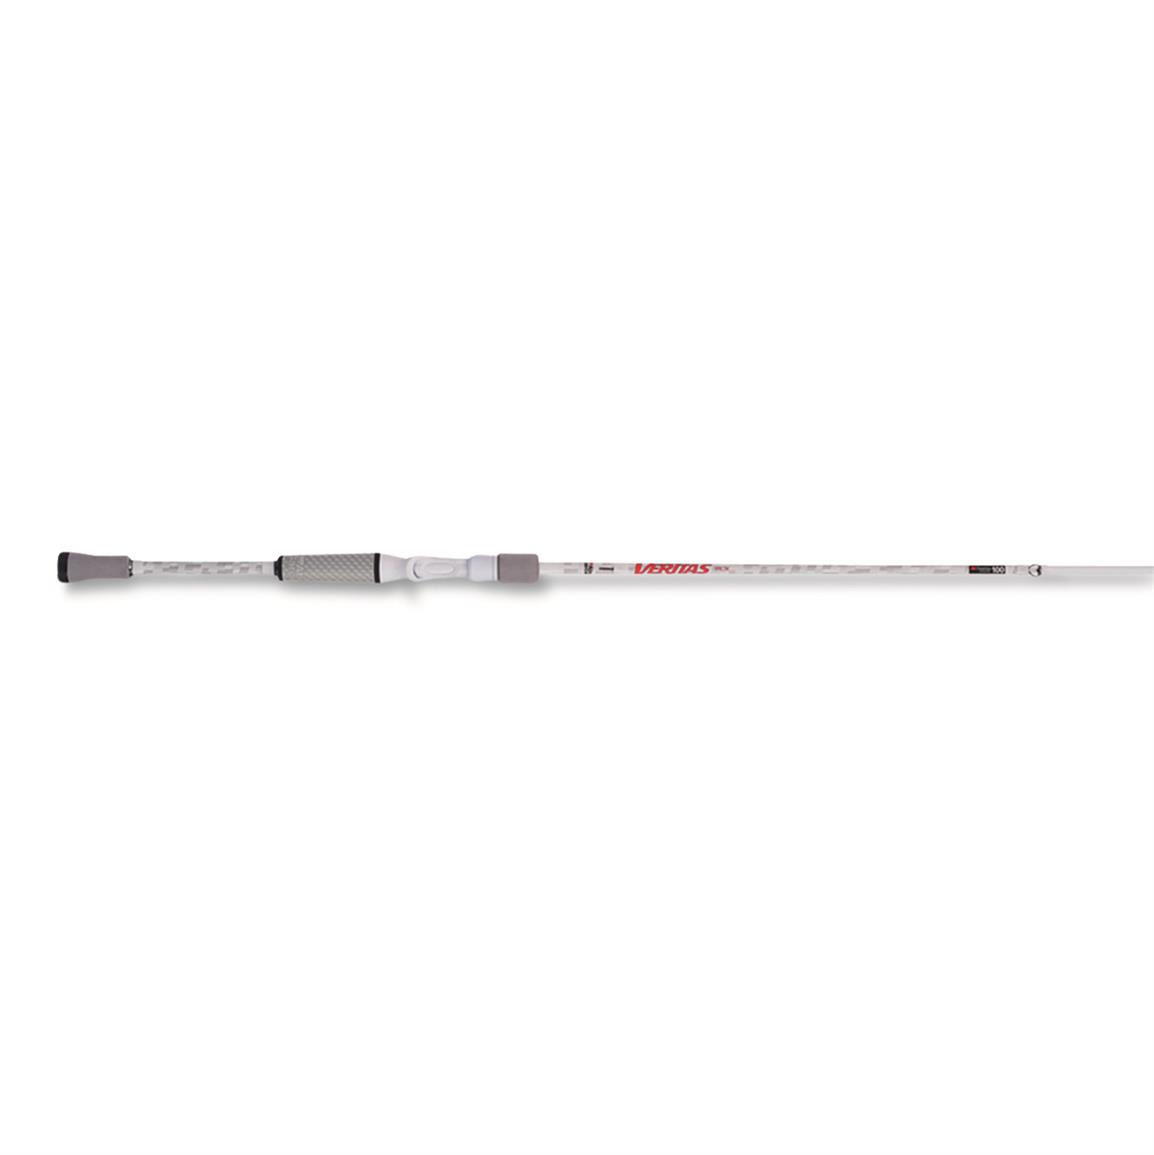 Abu Garcia Veritas LTD Casting Rod, 7' Length, Heavy Power, Extra Fast  Action - 735626, Casting Rods at Sportsman's Guide